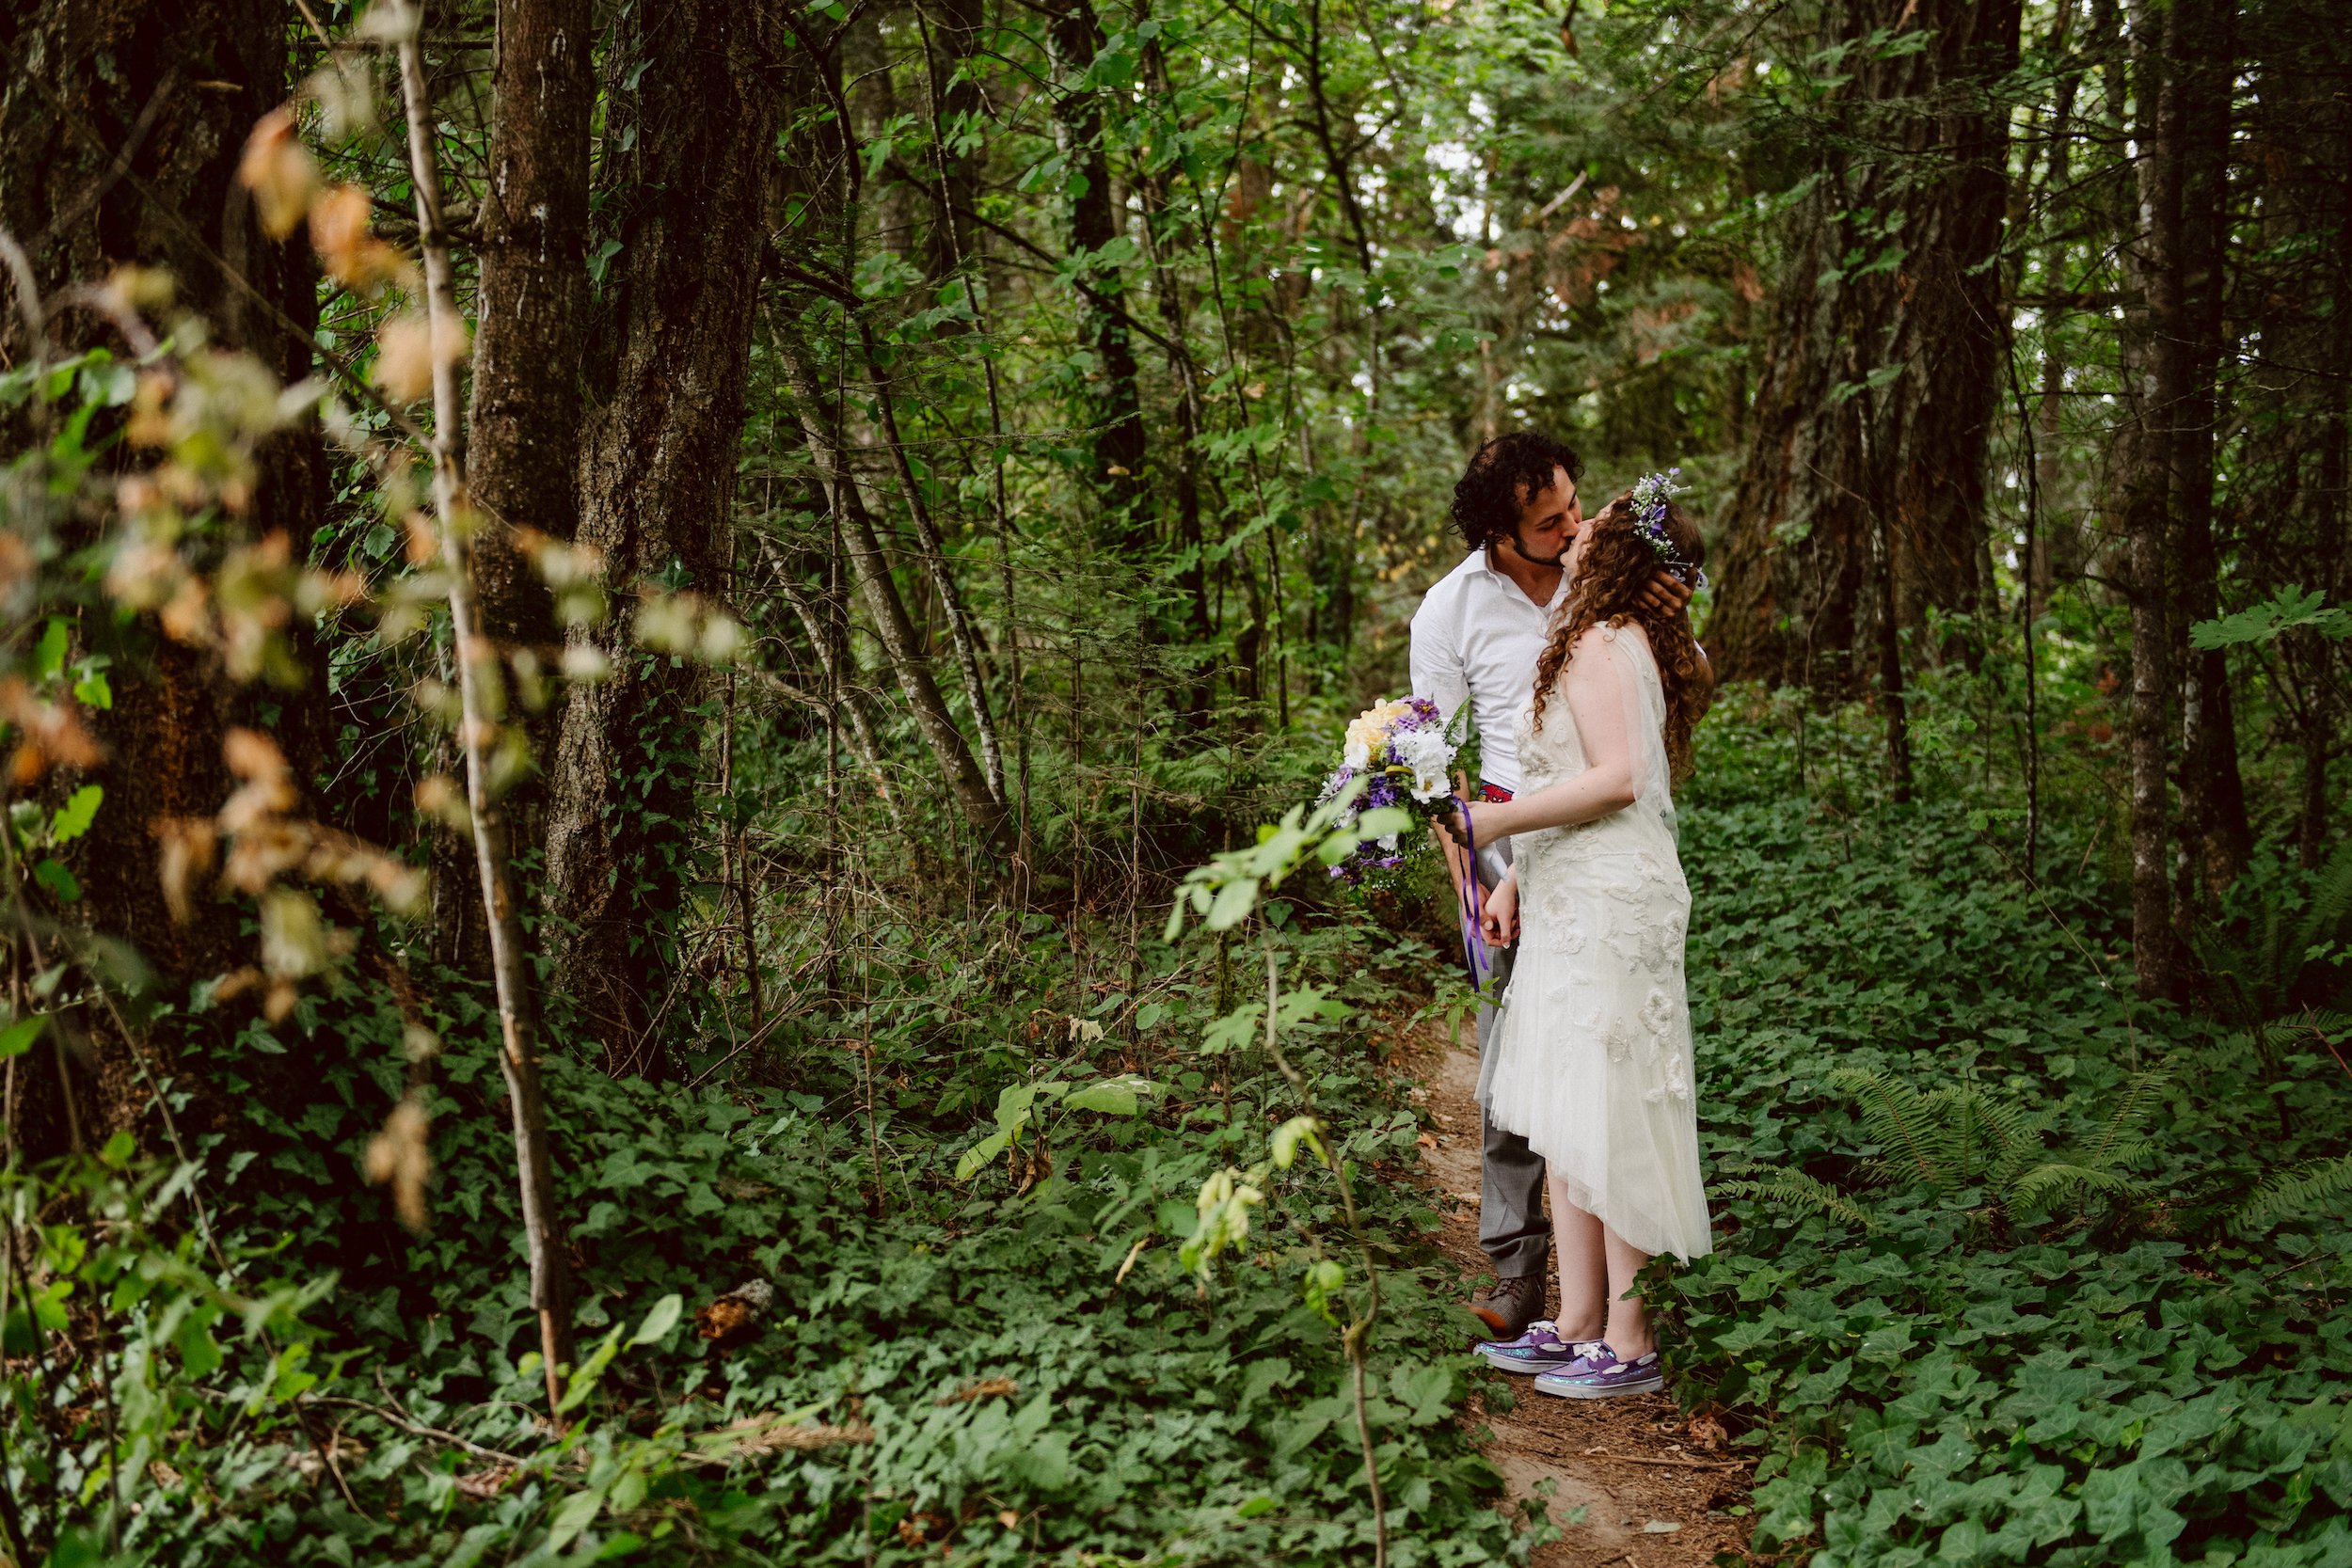 A man and a woman in wedding attire kiss in the middle of a singletrack trail in the middle of the woods